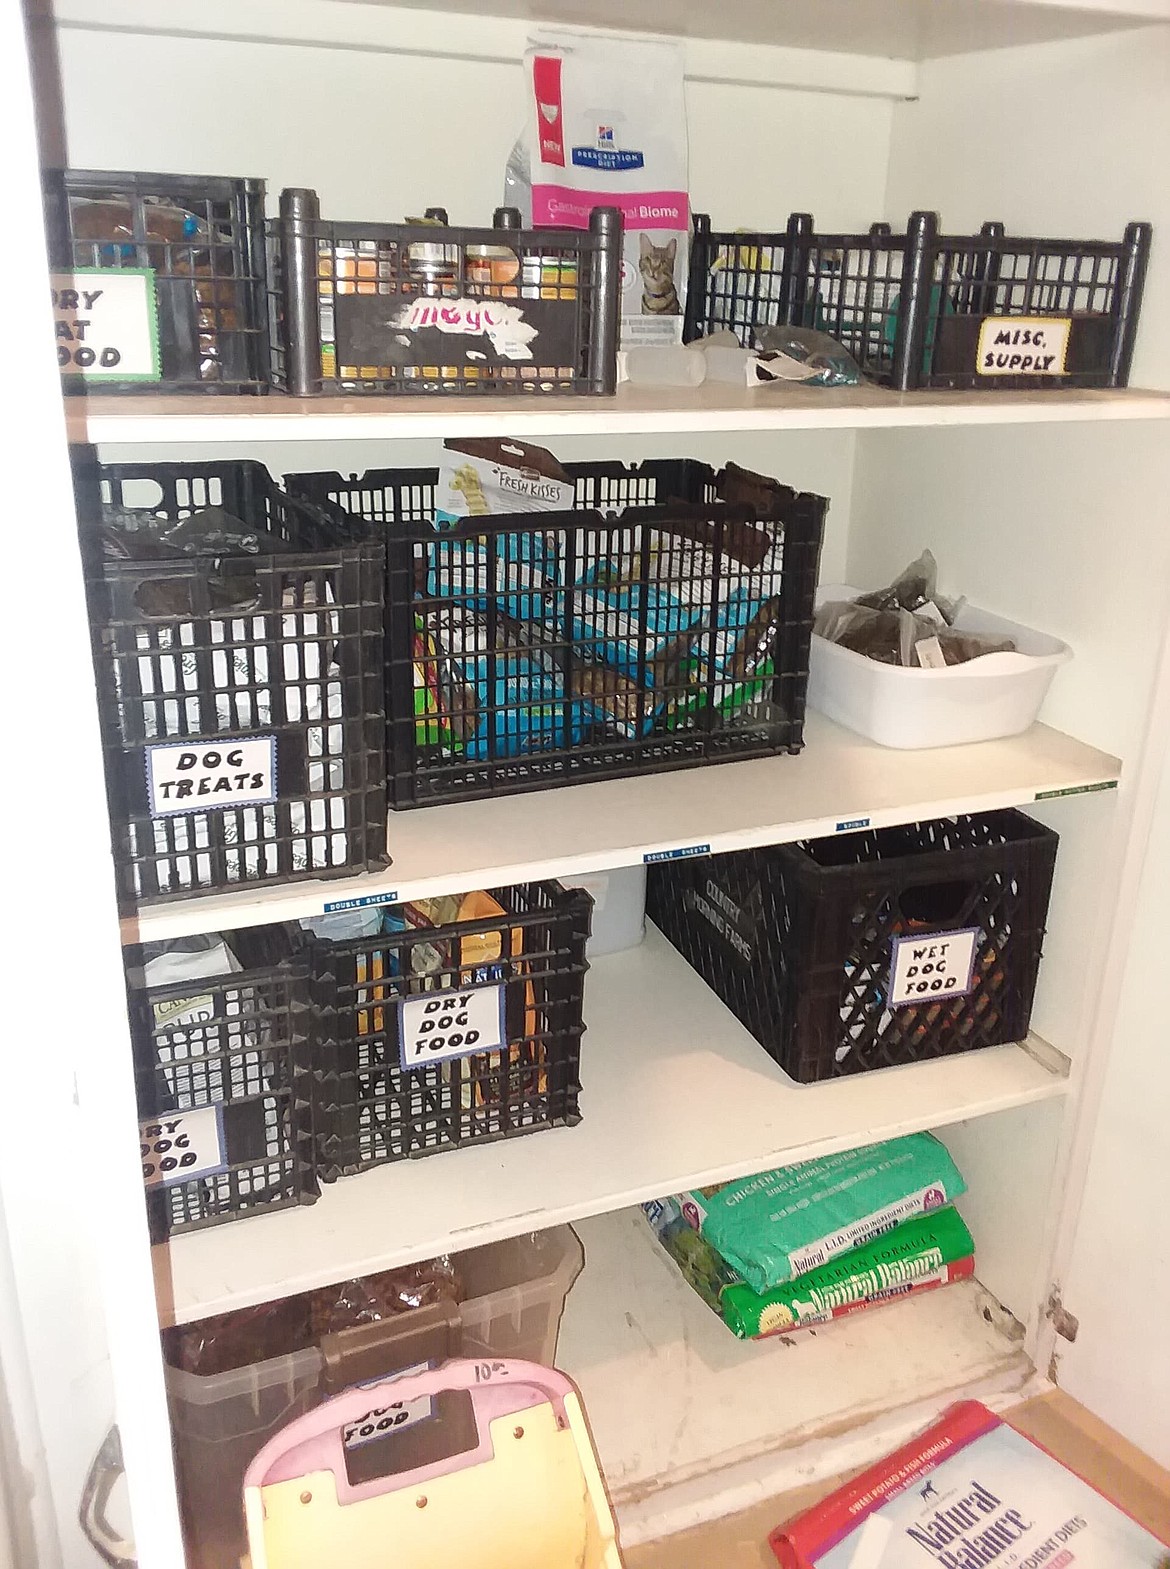 Shawna Kluge’s pet pantry started out as a single purchase of pet food and has grown into a resource for pet owners in the community.